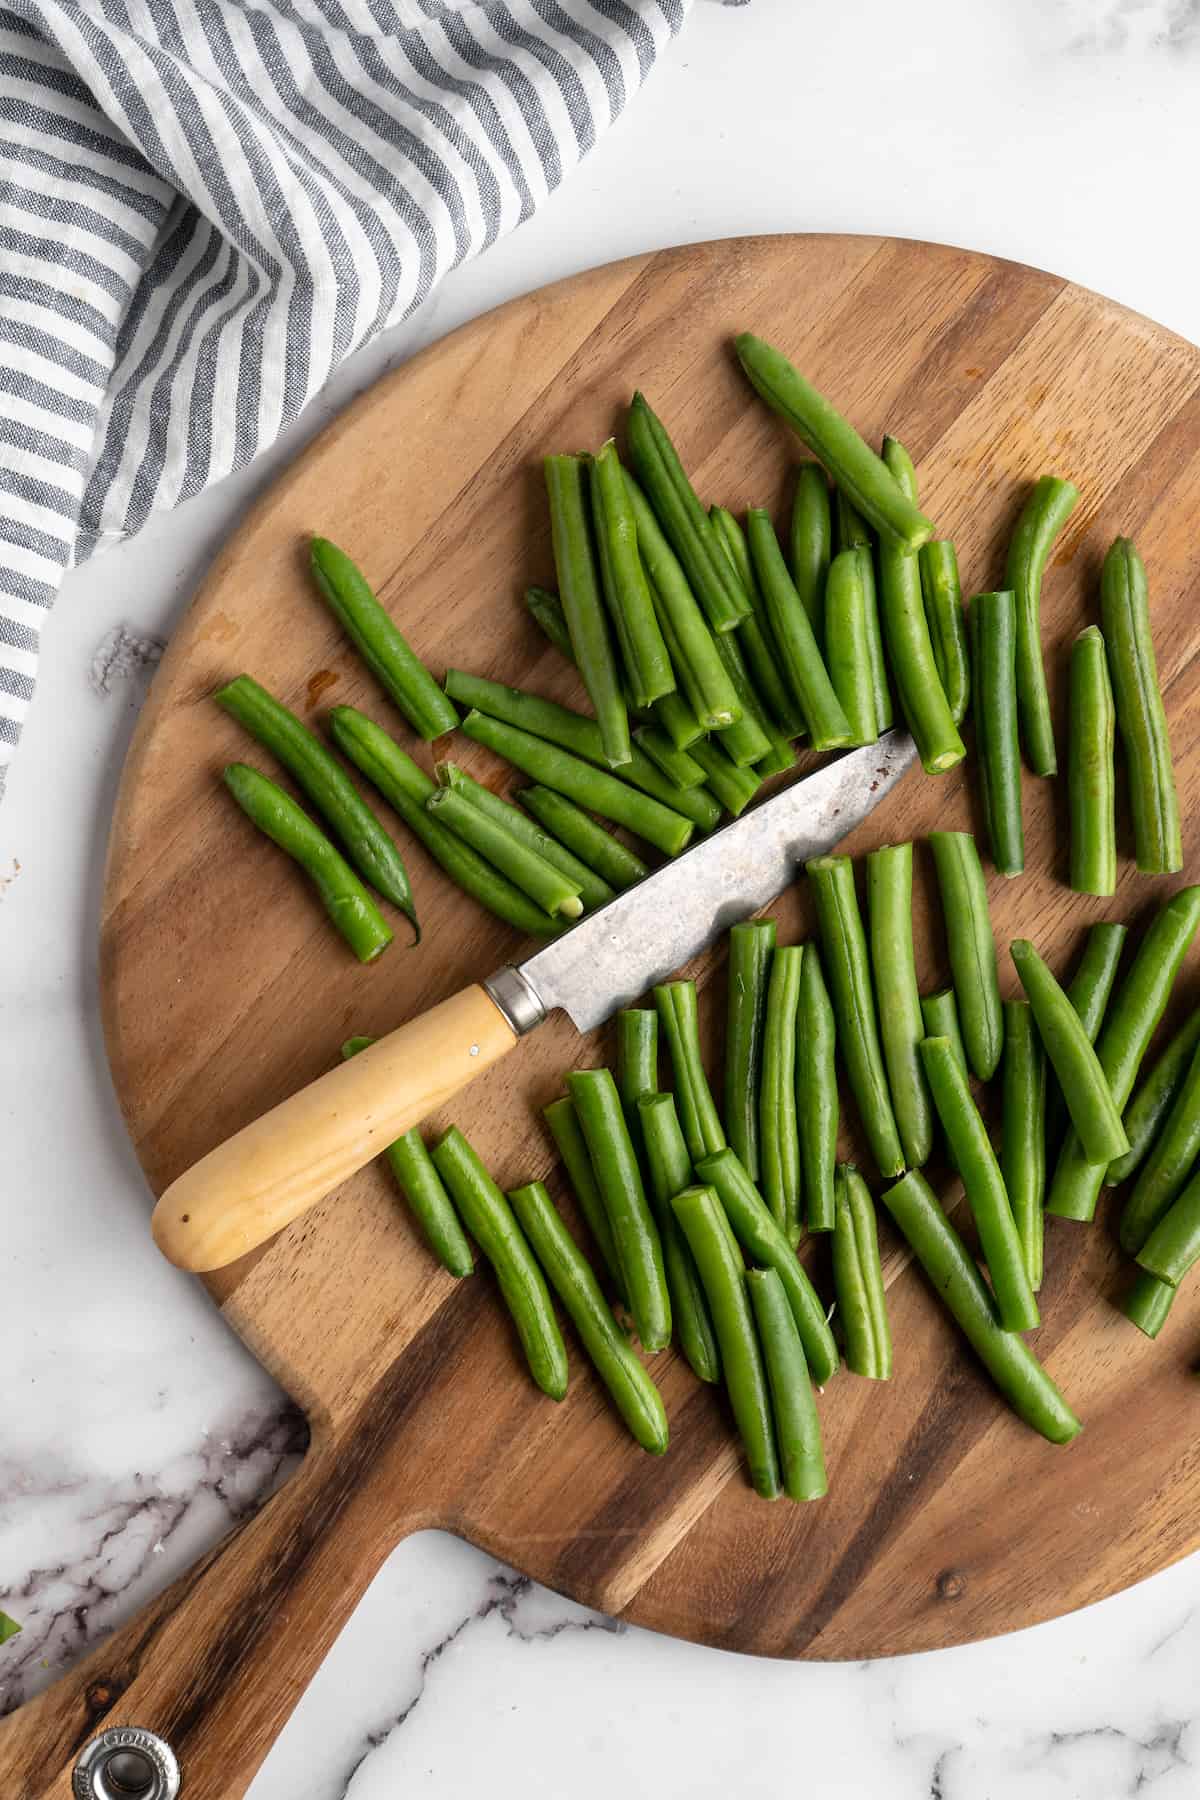 Green beans on cutting board with knife